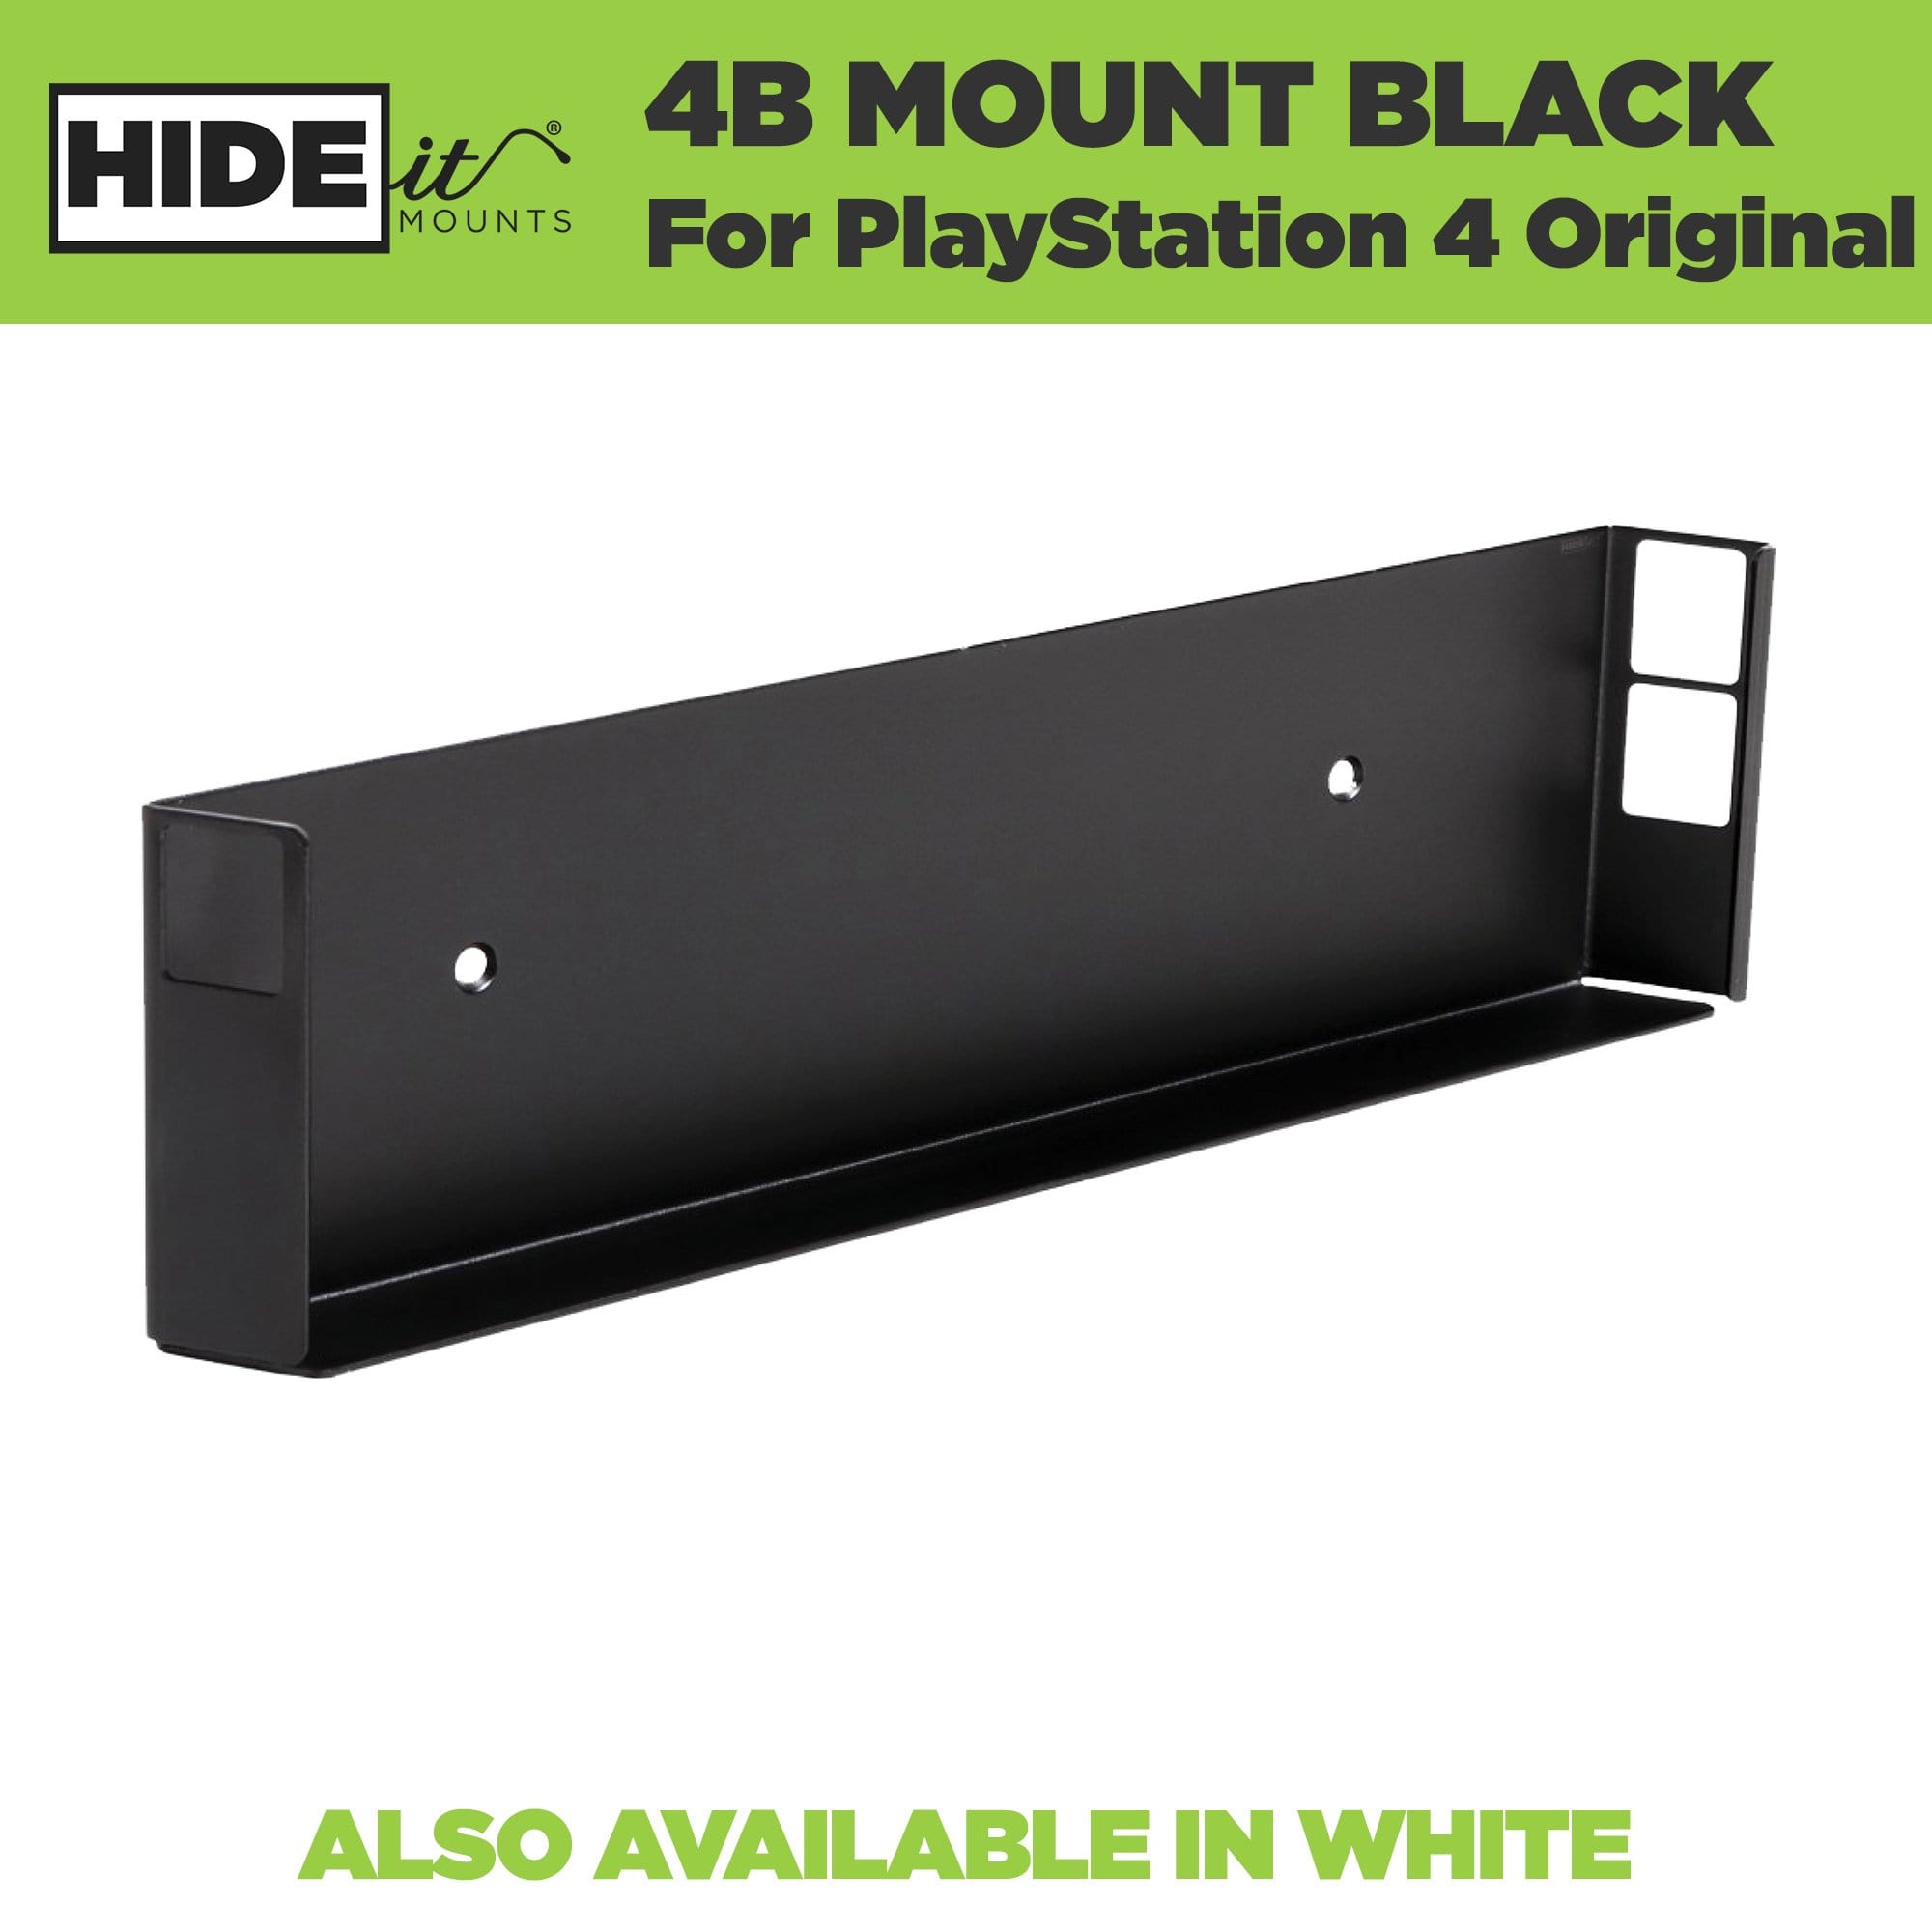 PS4 Wall Mount  HIDEit Mount for PlayStation 4 Original Game